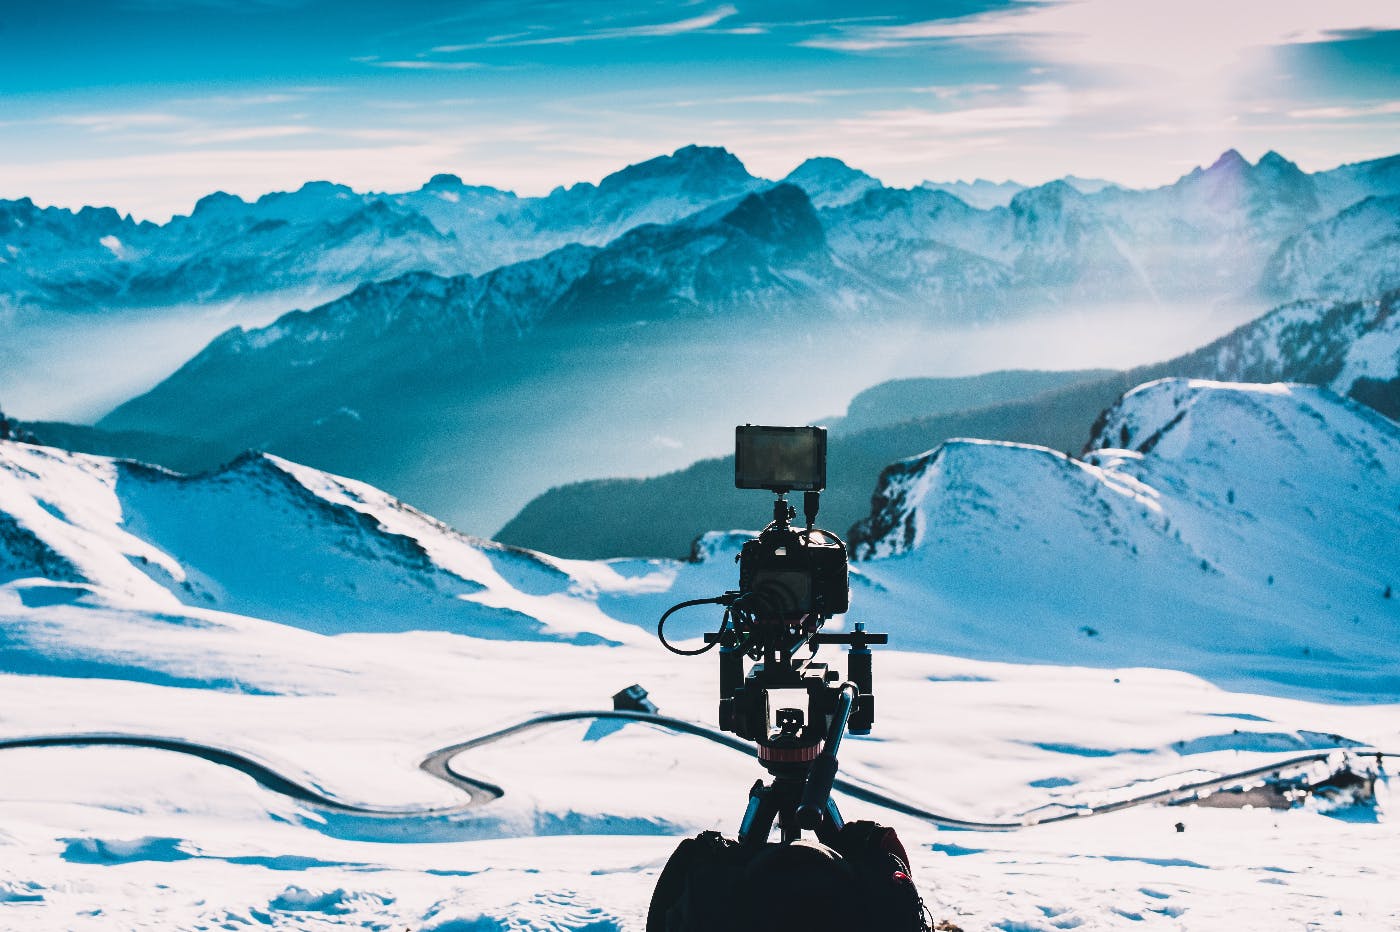 A video camera set up facing a snow covered mountain range